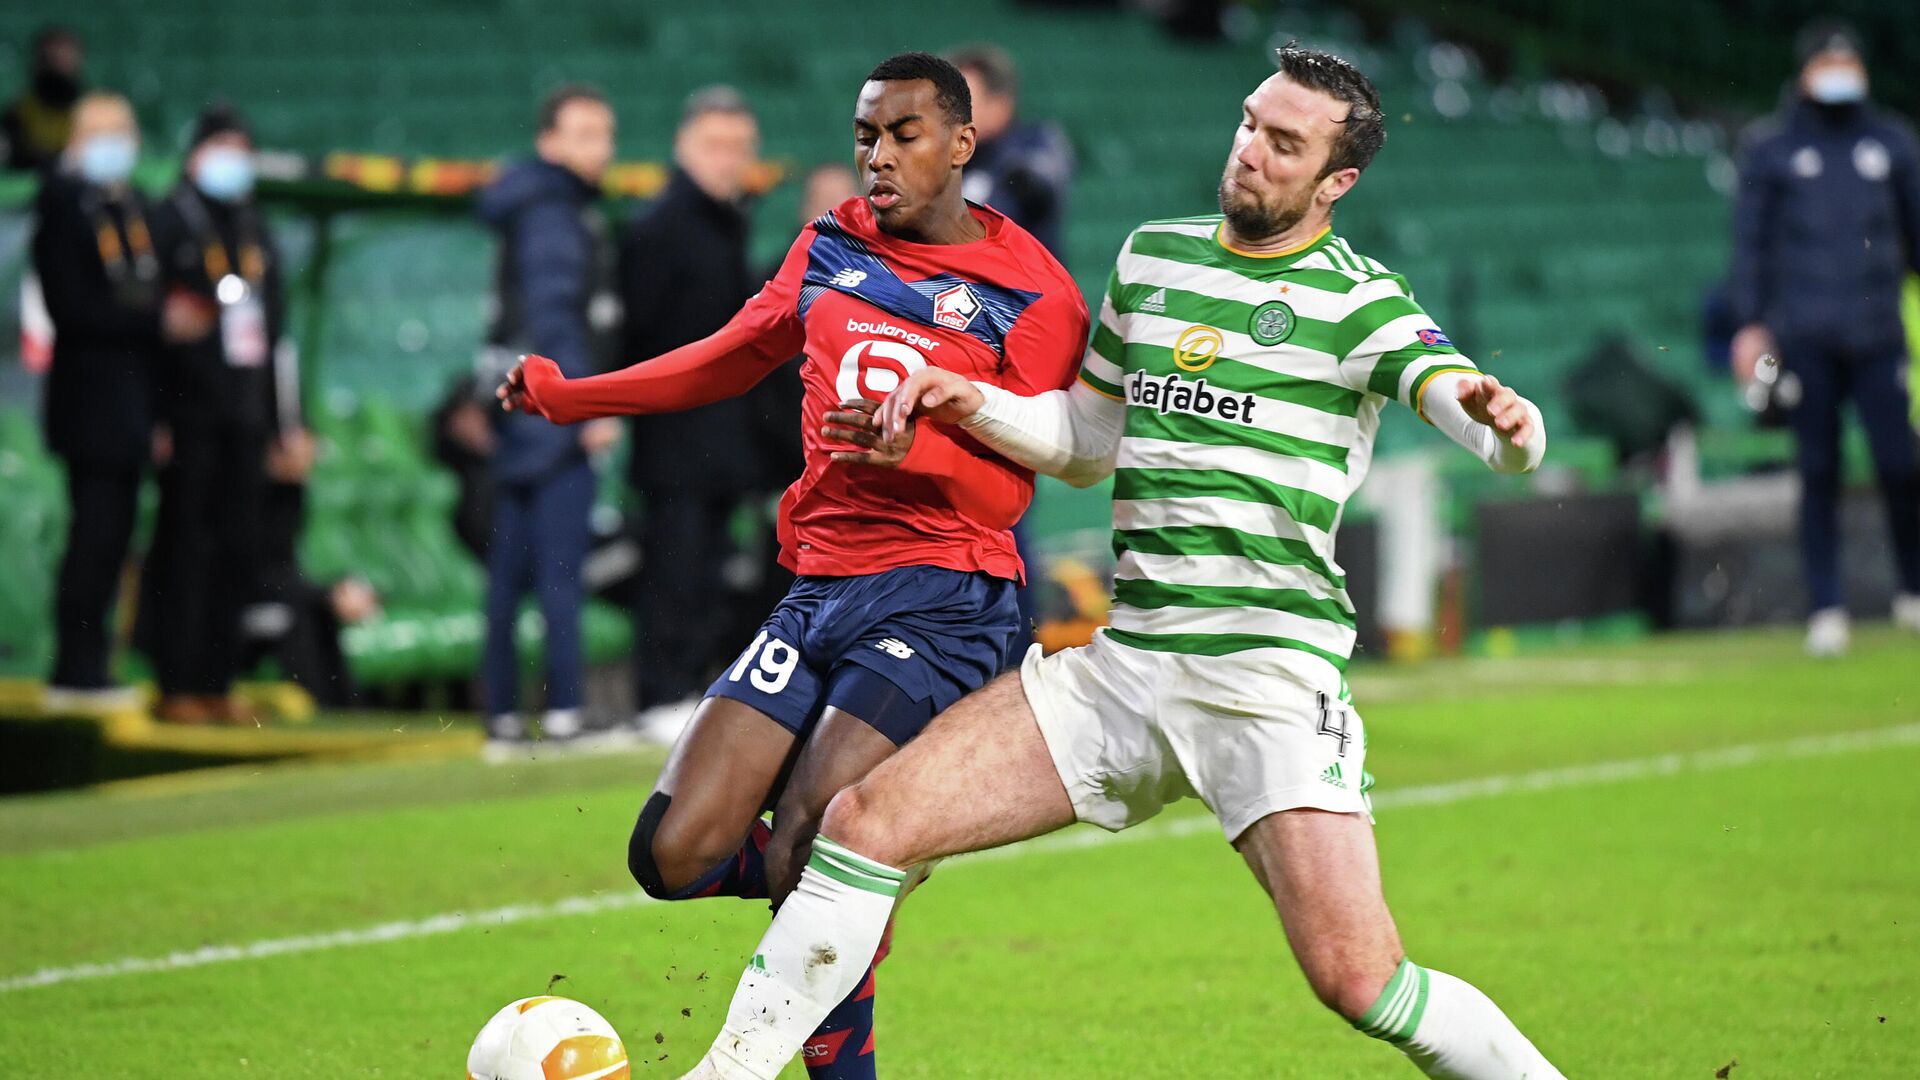 Lille's French forward Isaac Lihadji (L) vies with Celtic's Irish defender Shane Duffy (R) during the UEFA Europa League Group H football match between Celtic and Lille at Celtic Park stadium in Glasgow, Scotland on December 10, 2020. (Photo by ANDY BUCHANAN / POOL / AFP) - РИА Новости, 1920, 11.12.2020